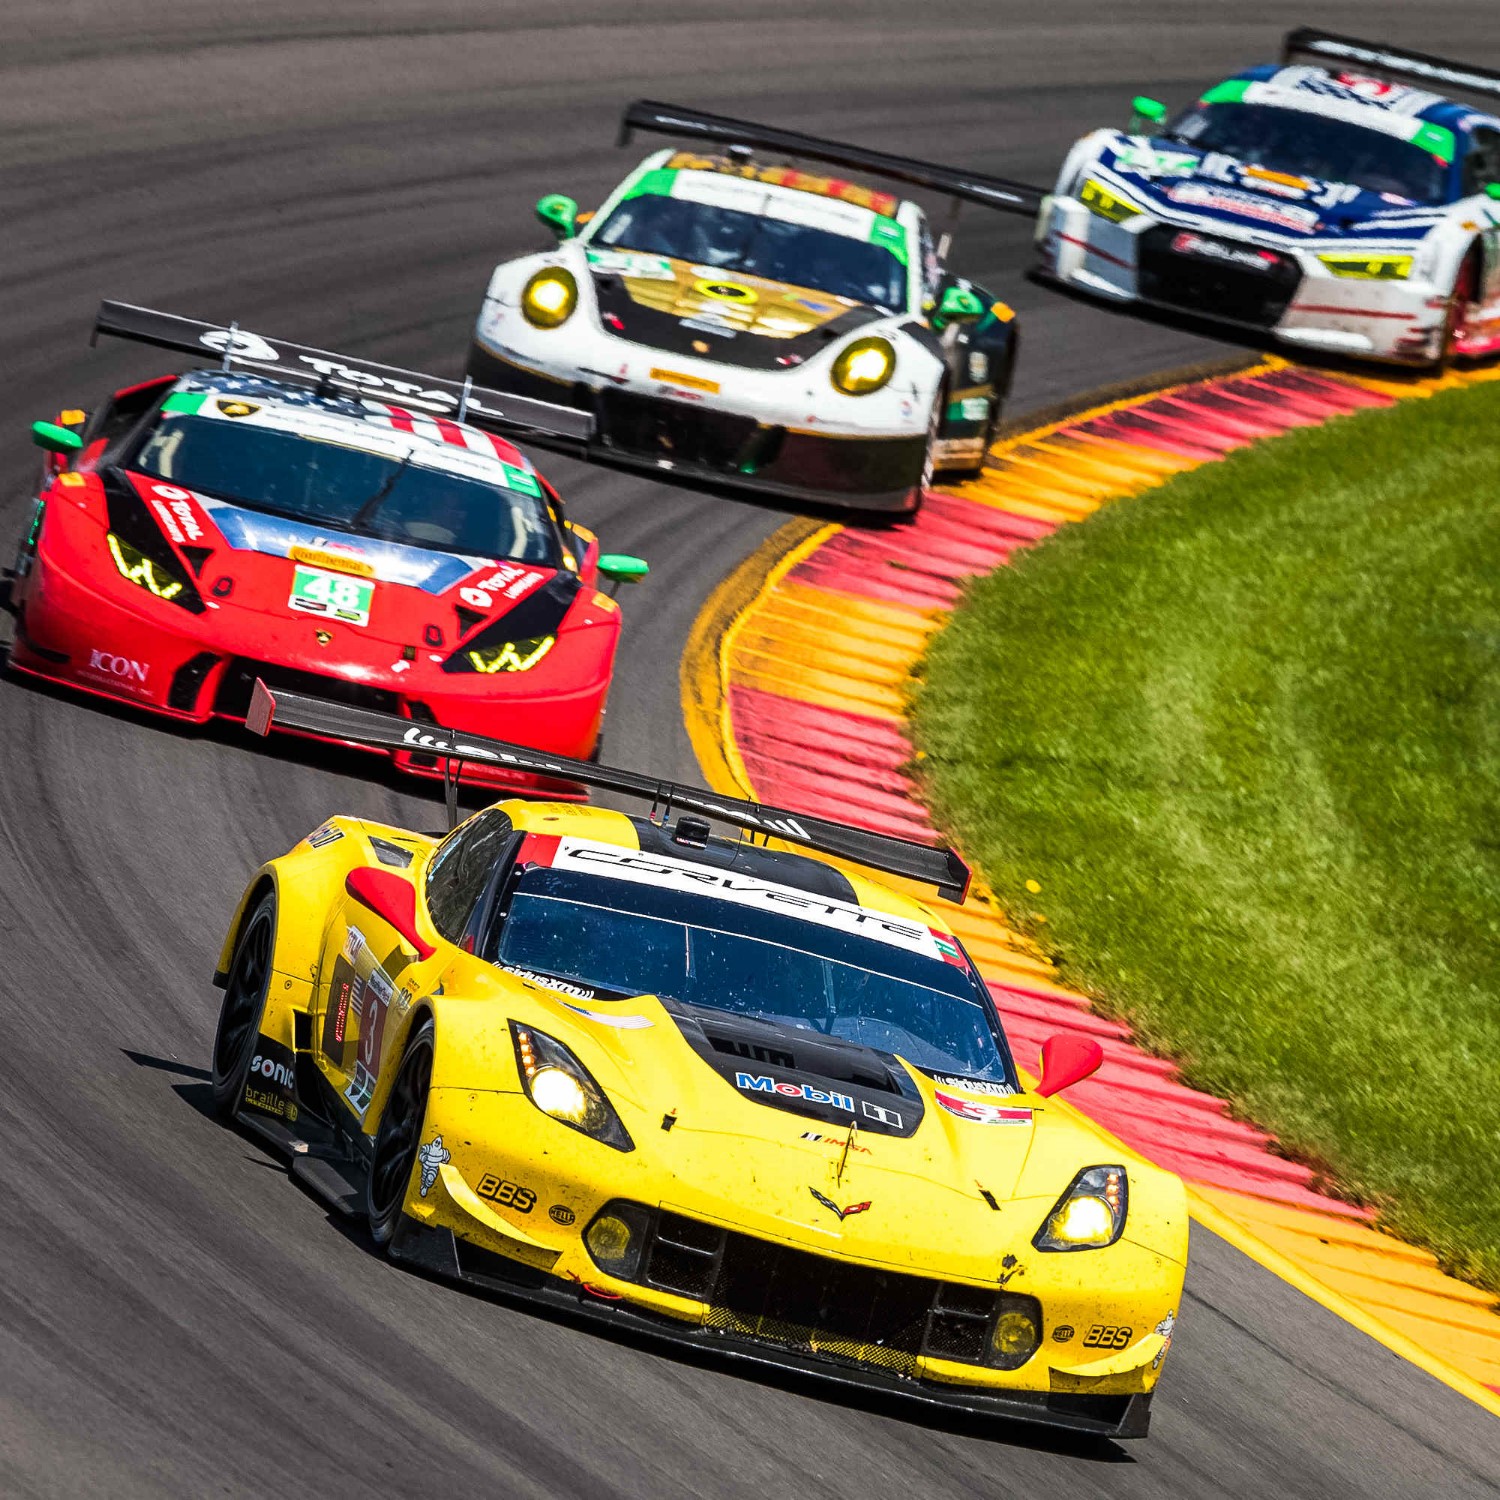 The #3 Corvette currently leads GTLM